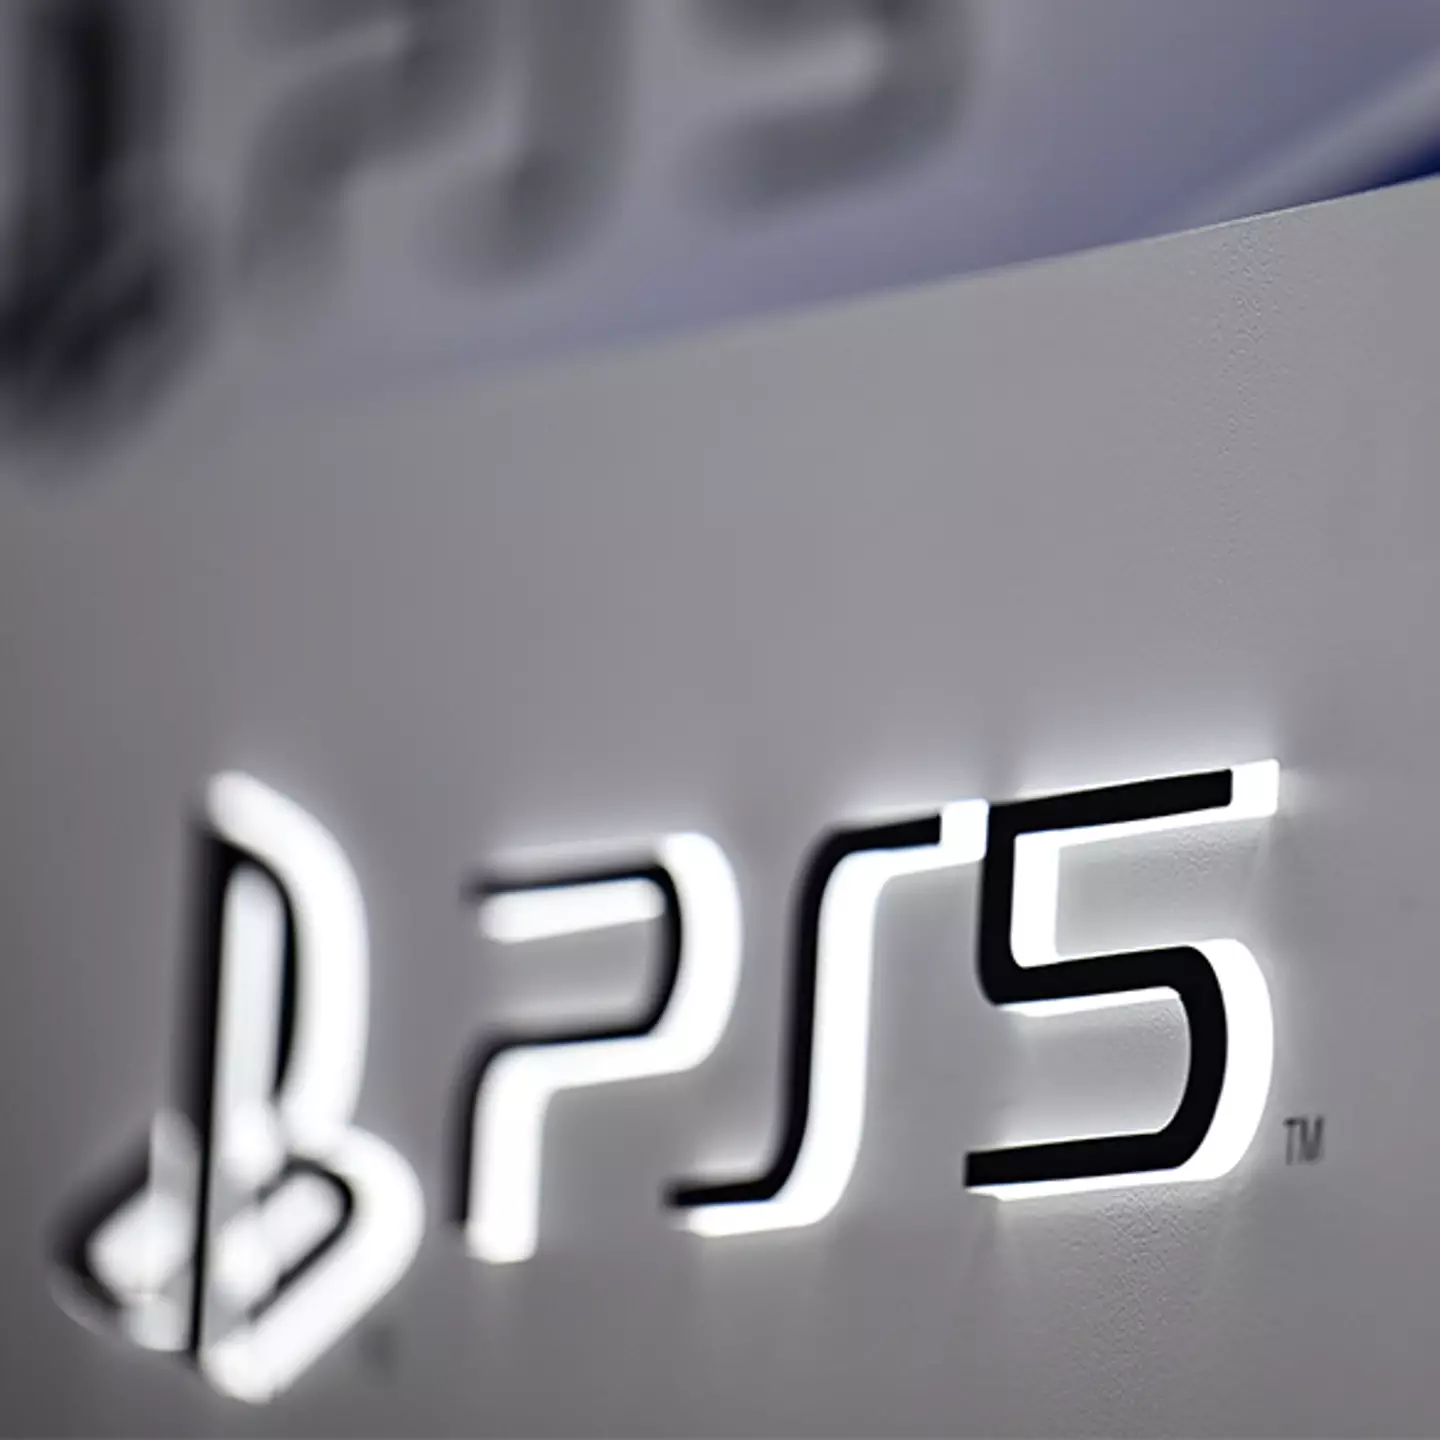 The PS5 Pro is reportedly coming this holiday season